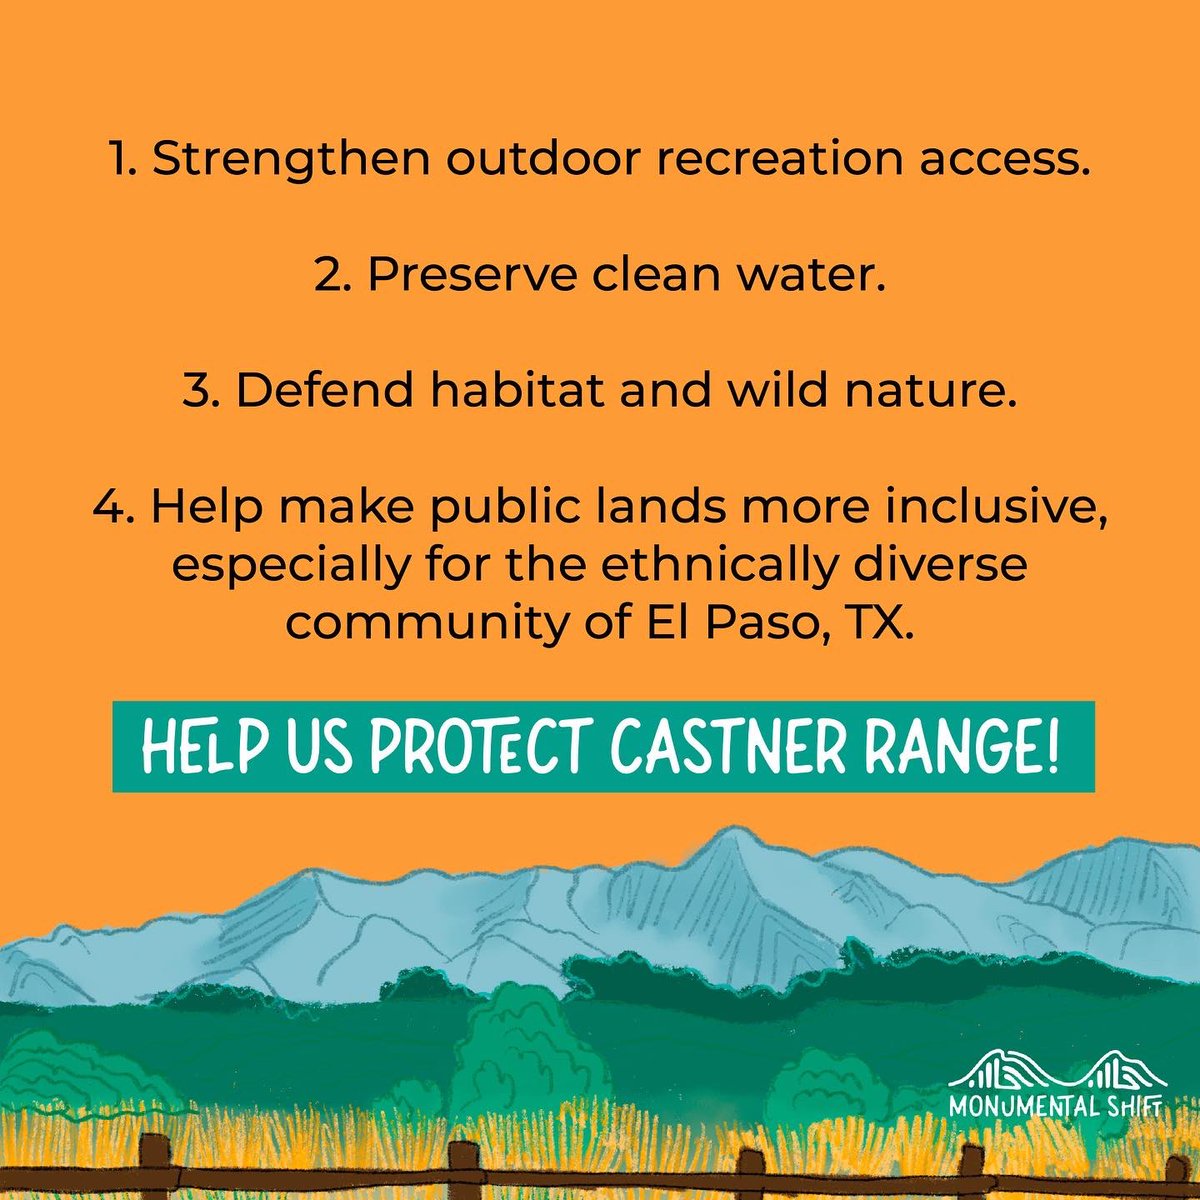 President Biden can immediately protect Castner range via the Antiquities Act. Protecting the largest bi-national community would benefit El Paso and all ethnically diverse communities across the U.S. 

#CastnerRange #Caster4Ever #MonumentalSHIFT #LandProtection #LandManagement